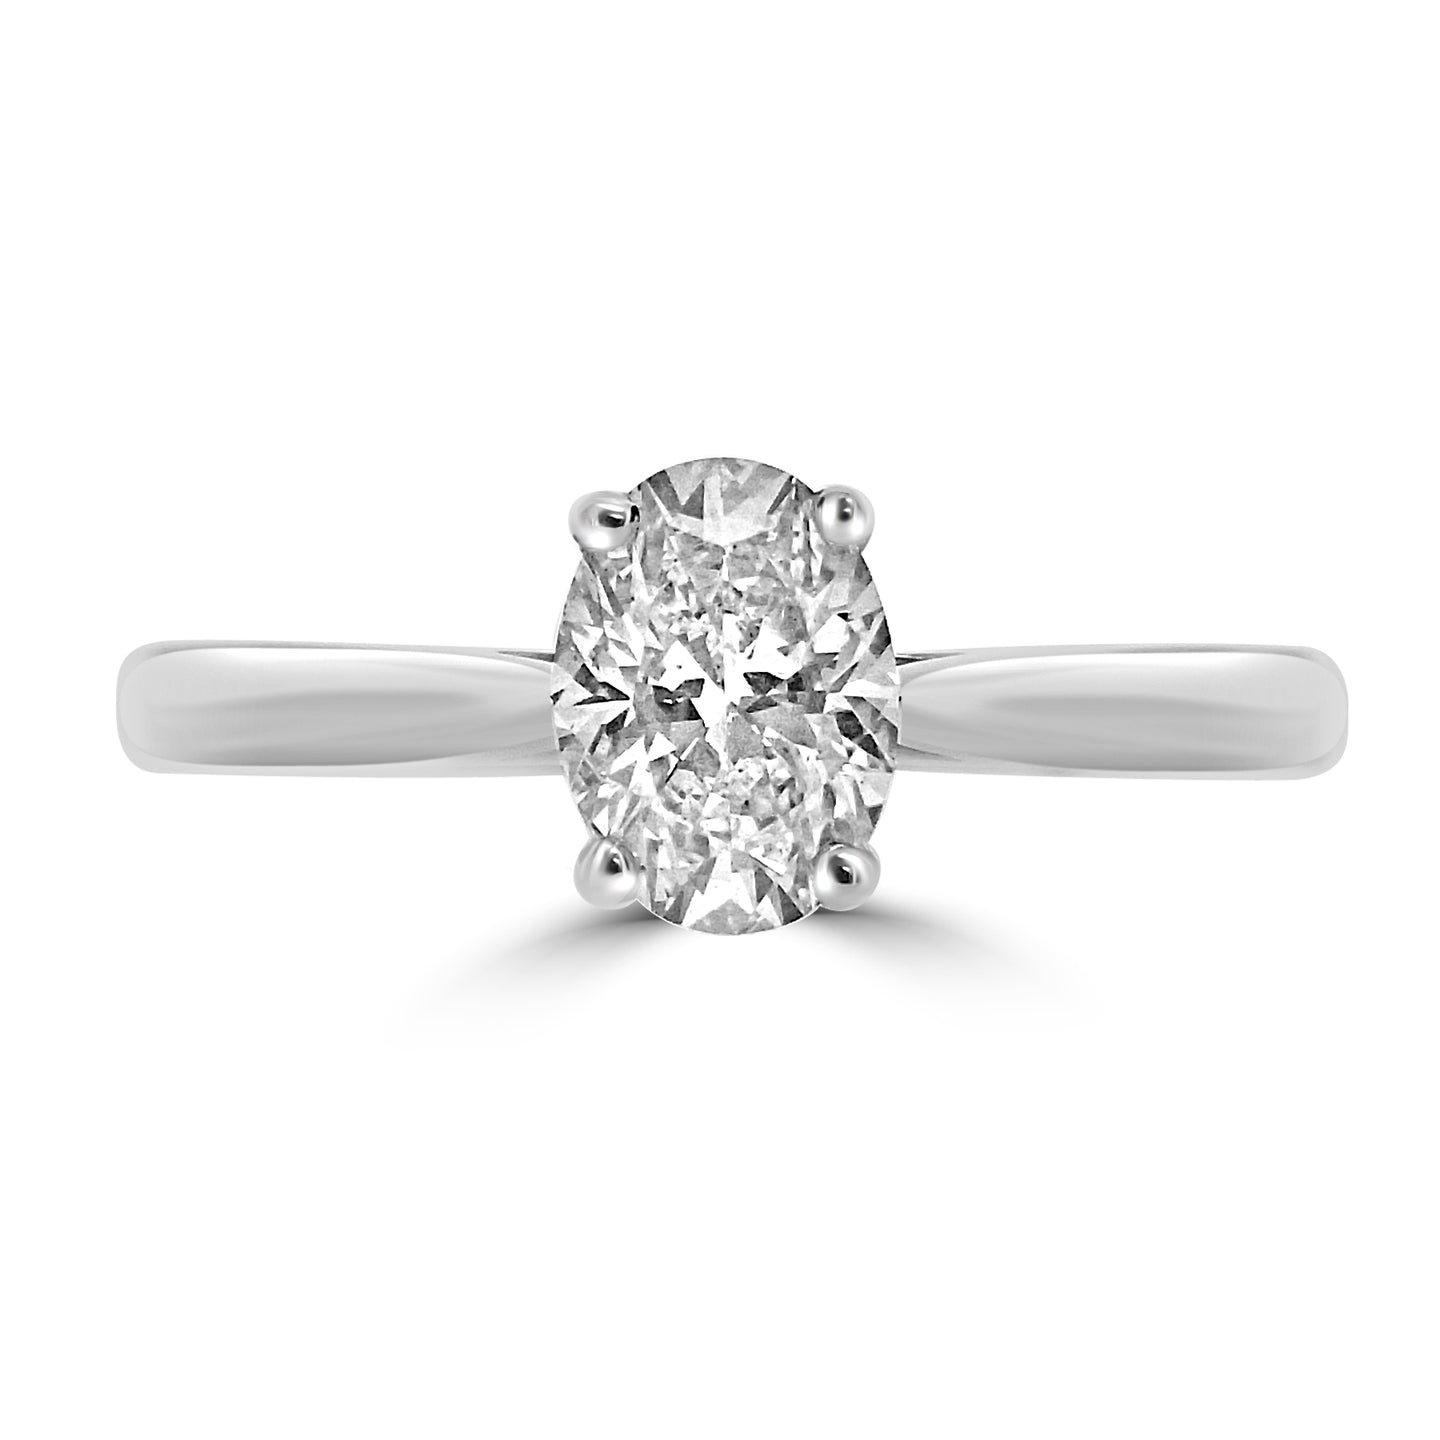 Oval Solitaire Engagement Ring 0.71ct